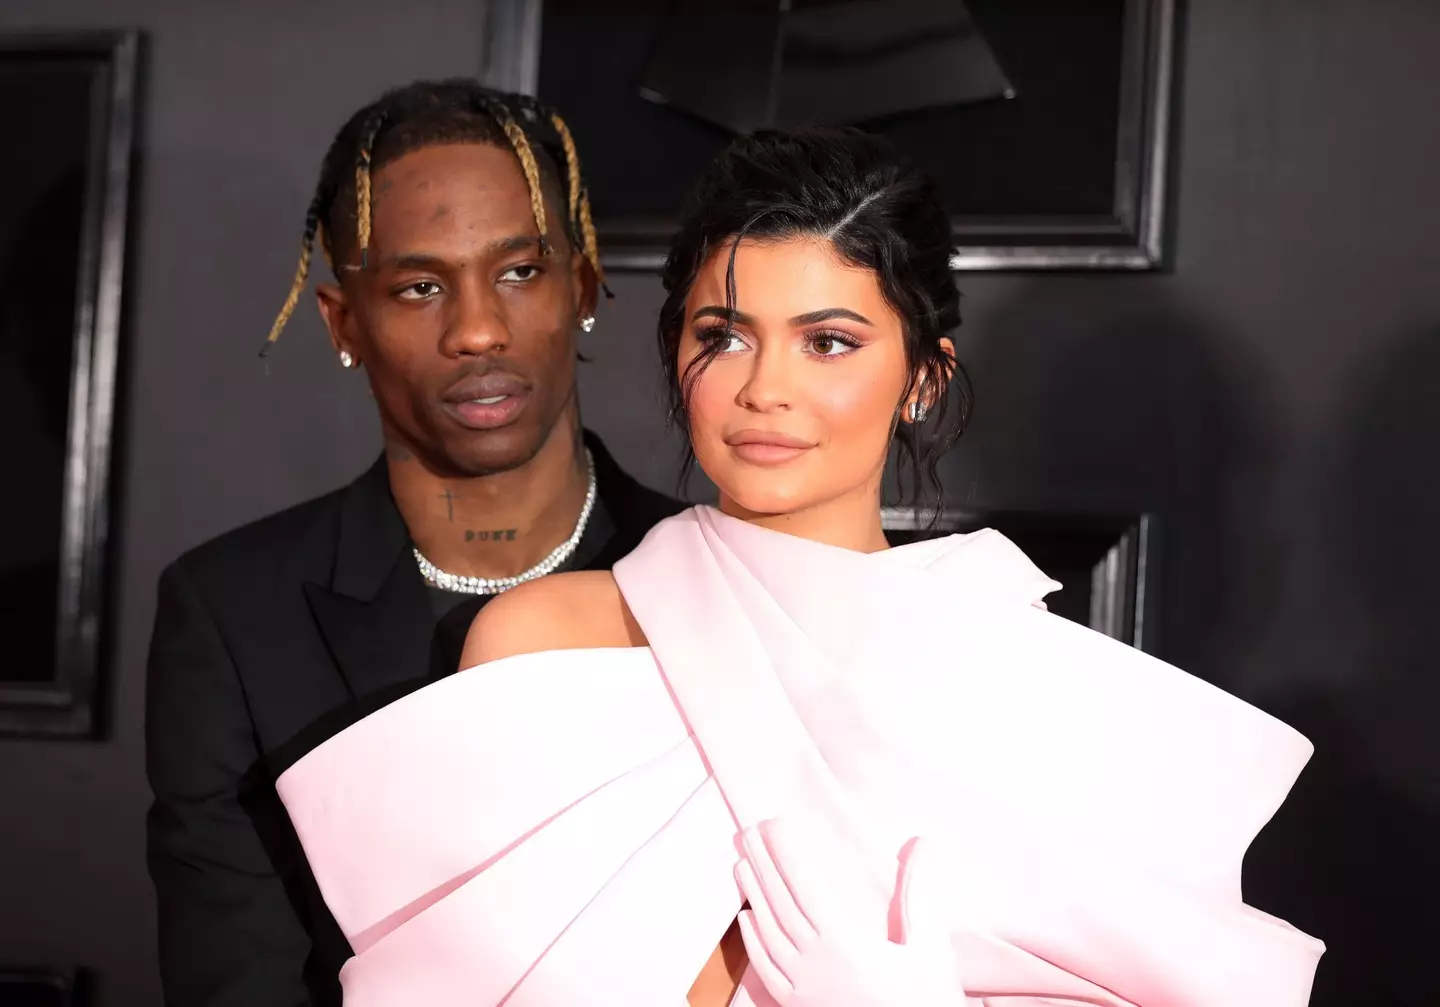 Travis Scott and Kylie Jenner still need to pick a name for their baby son.